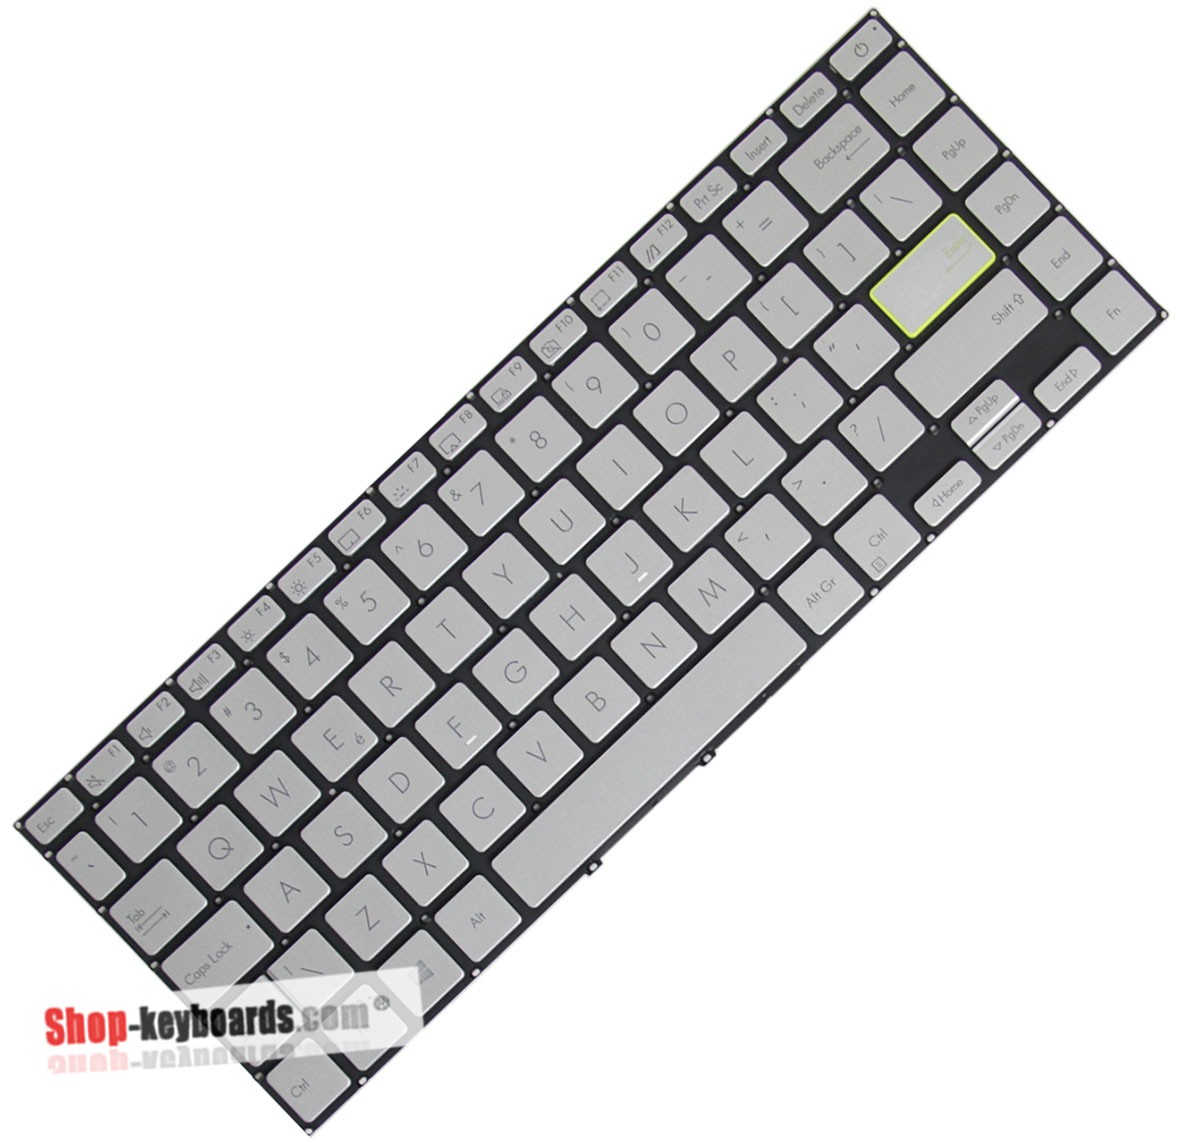 Asus 0KNB0-260NLA00  Keyboard replacement